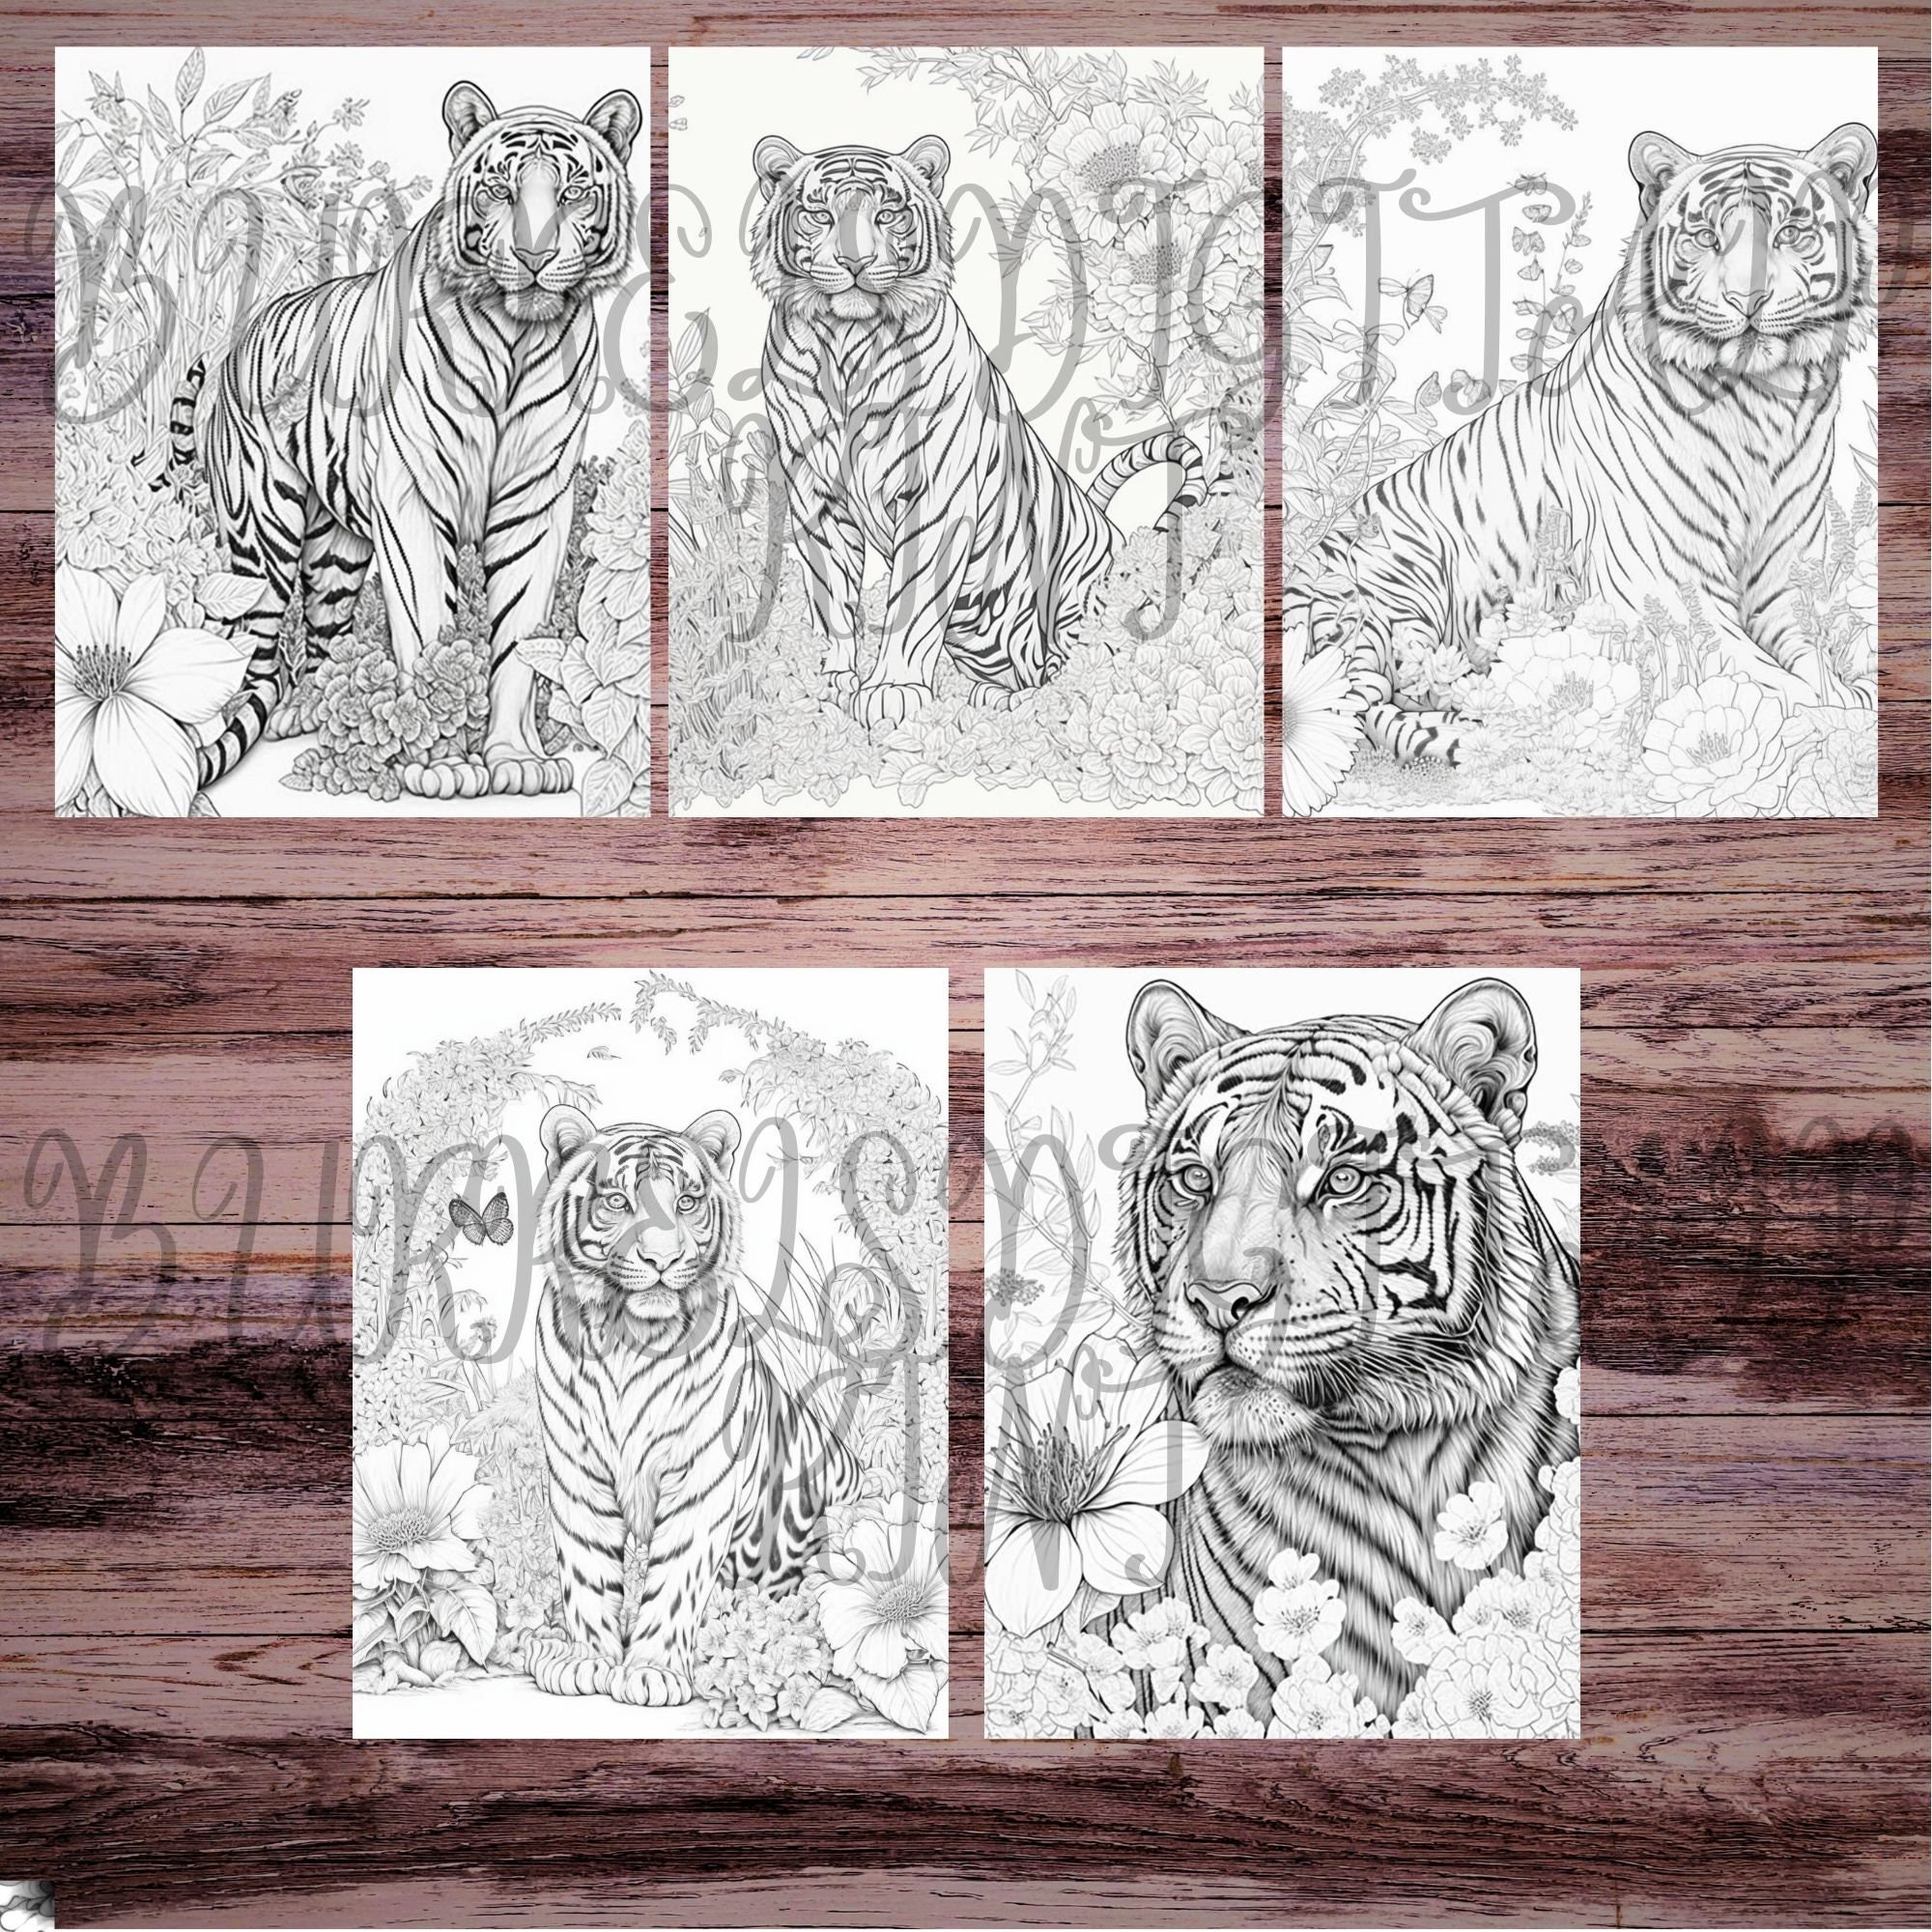 Tiger Coloring Book for Adults: Stress-Free Designs For Relaxation